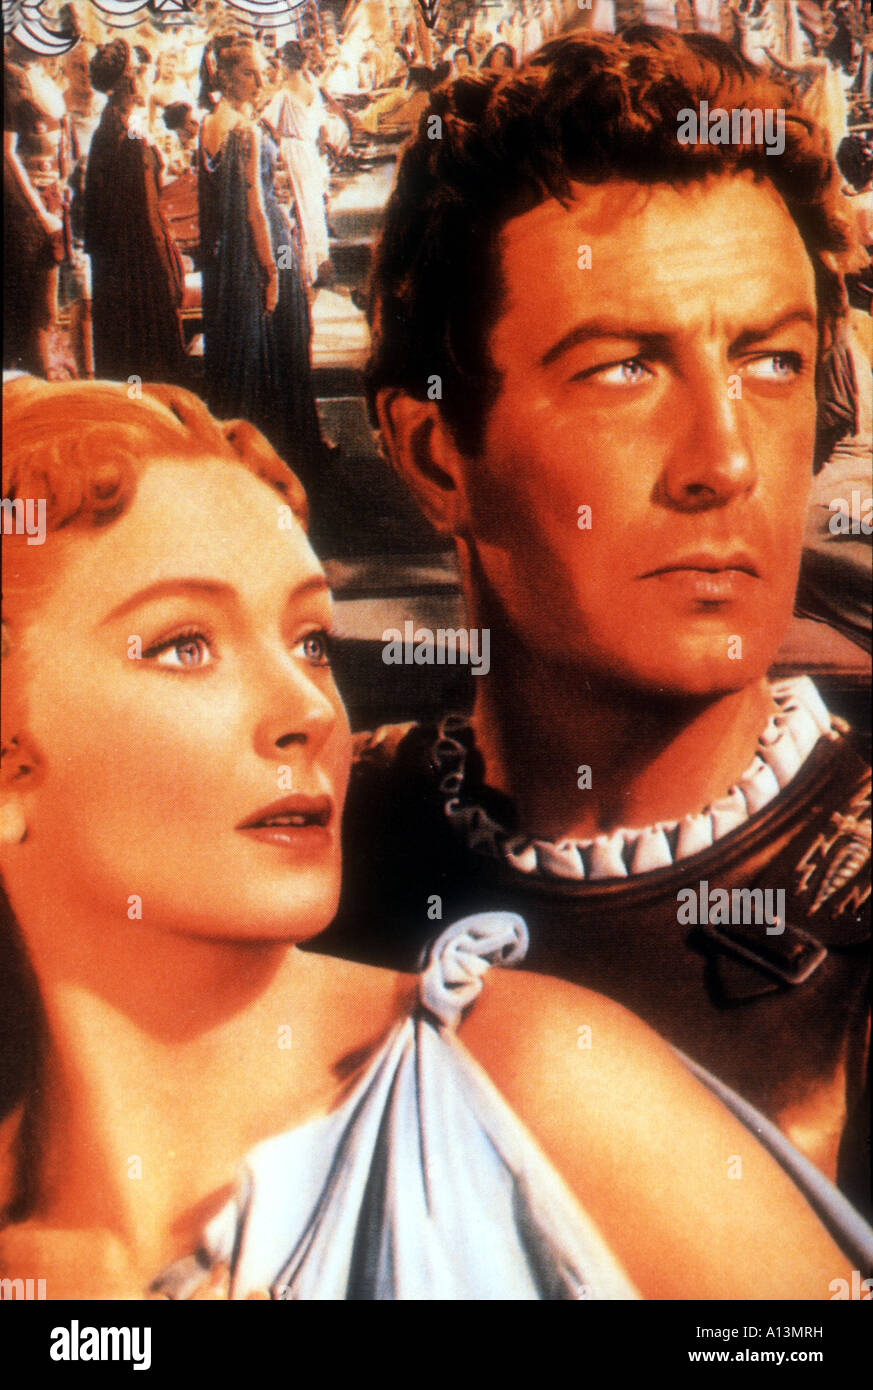 Quo Vadis Official Trailer #1 - Robert Taylor Movie (1951) HD 